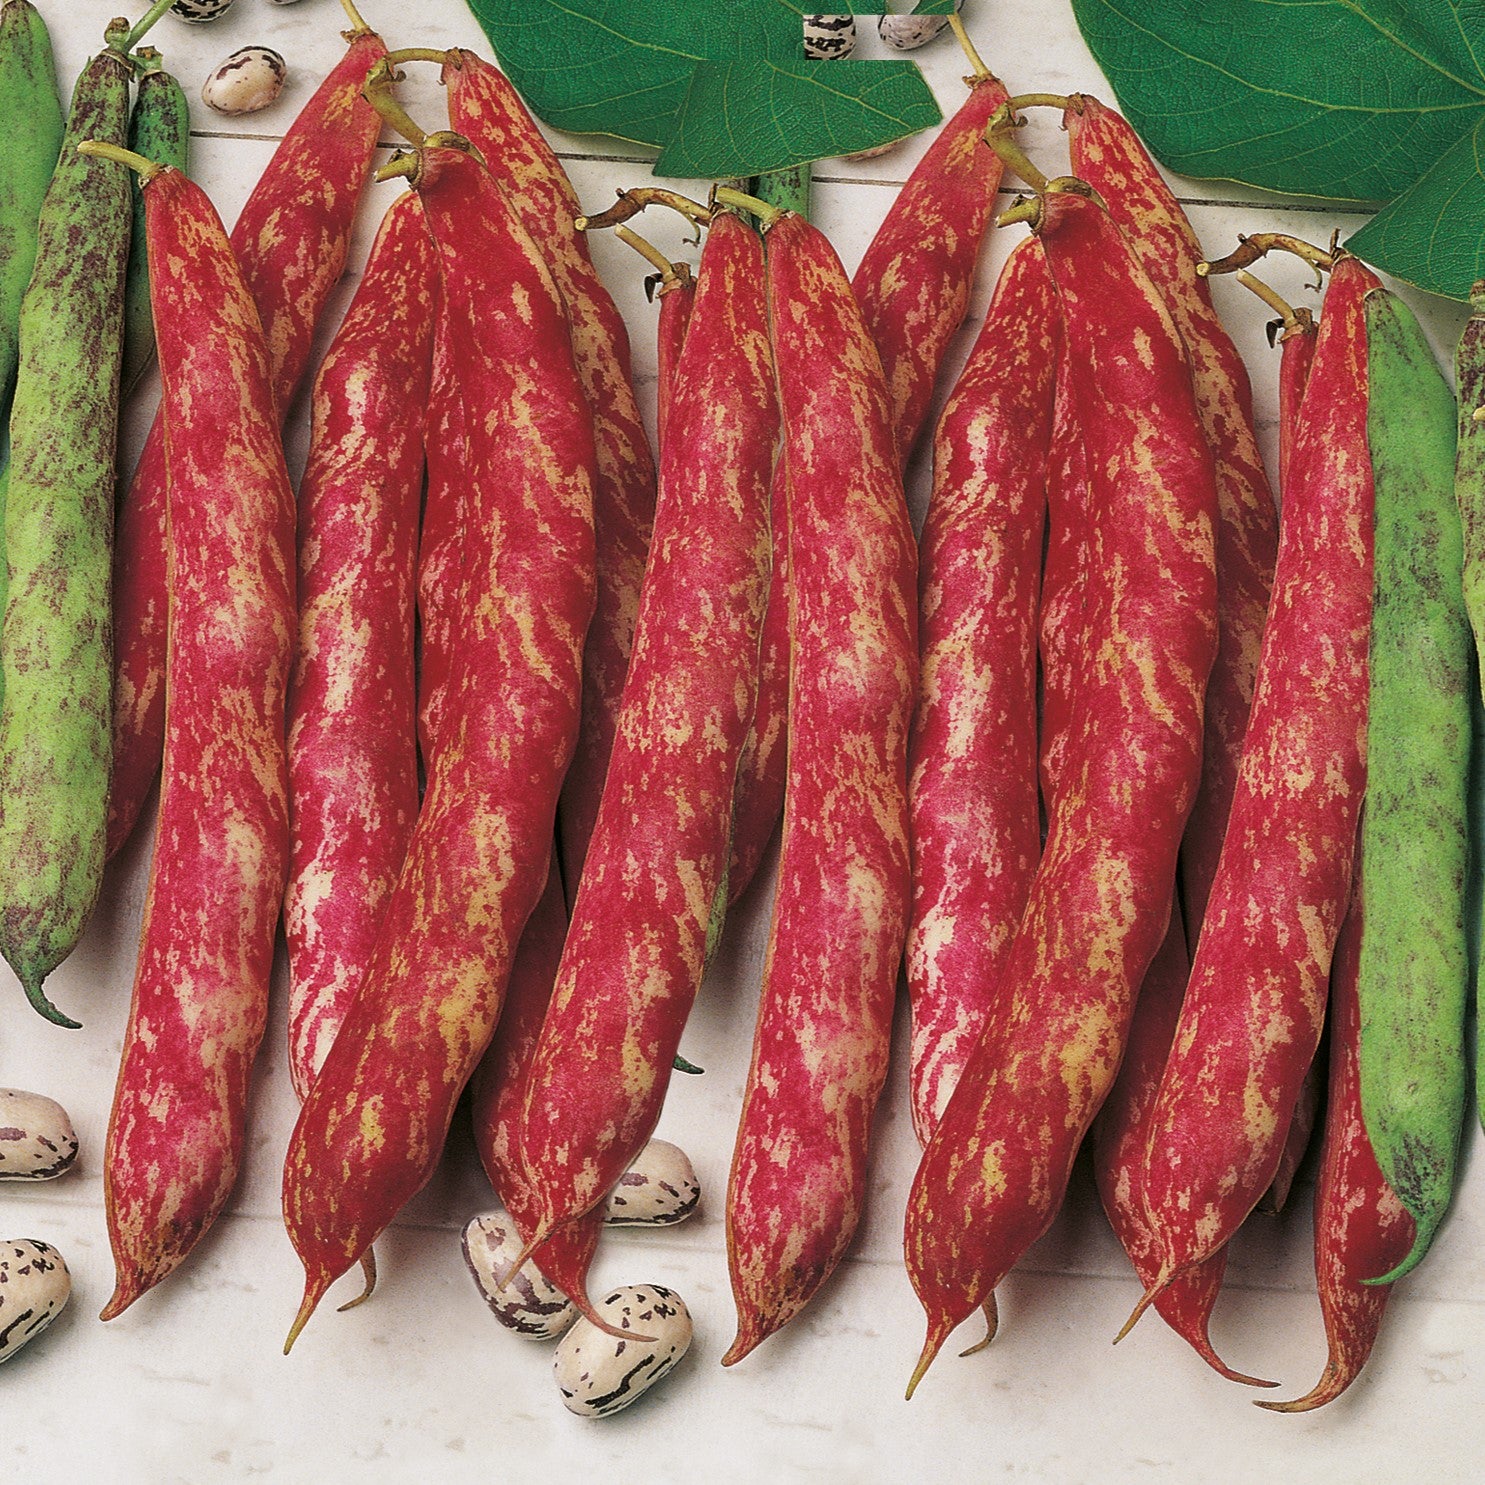 Heirloom Peas and Beans